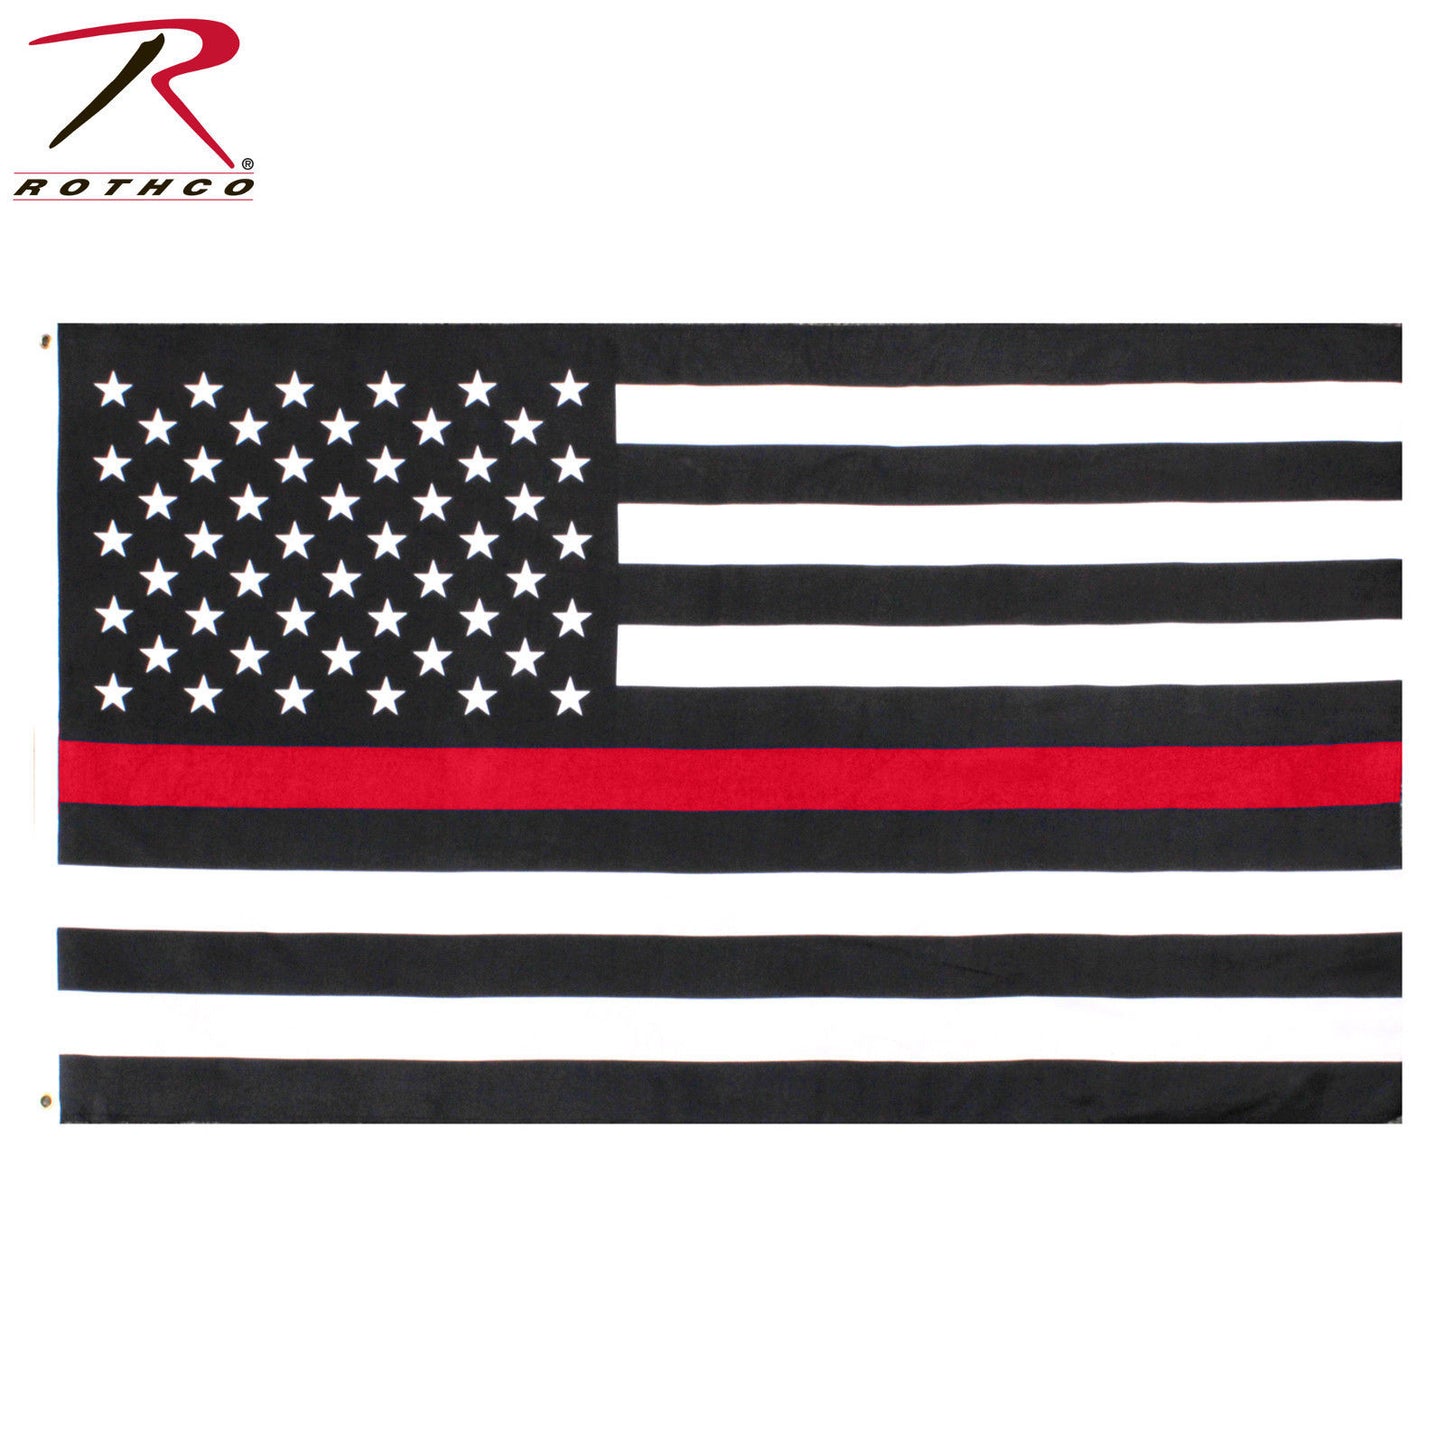 Rothco 2'x3' Thin Red Line U.S. Flag - 2 Grommet Holes - 100% Polyester Flag